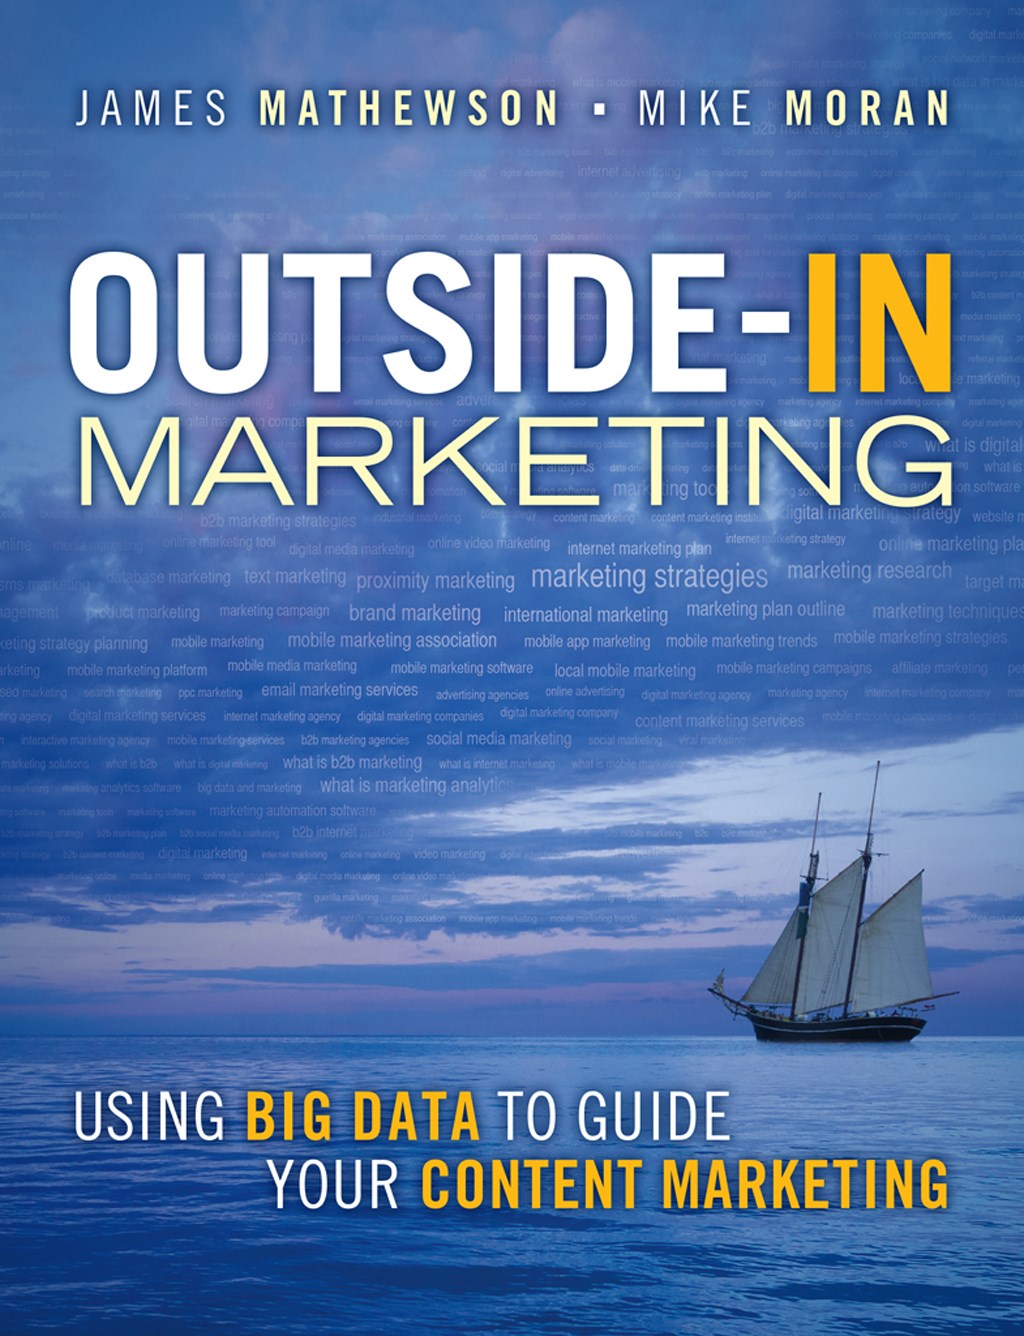 Outside-In Marketing: Using Big Data to Guide Your Content Marketing by James Mathewson and Mike Moran